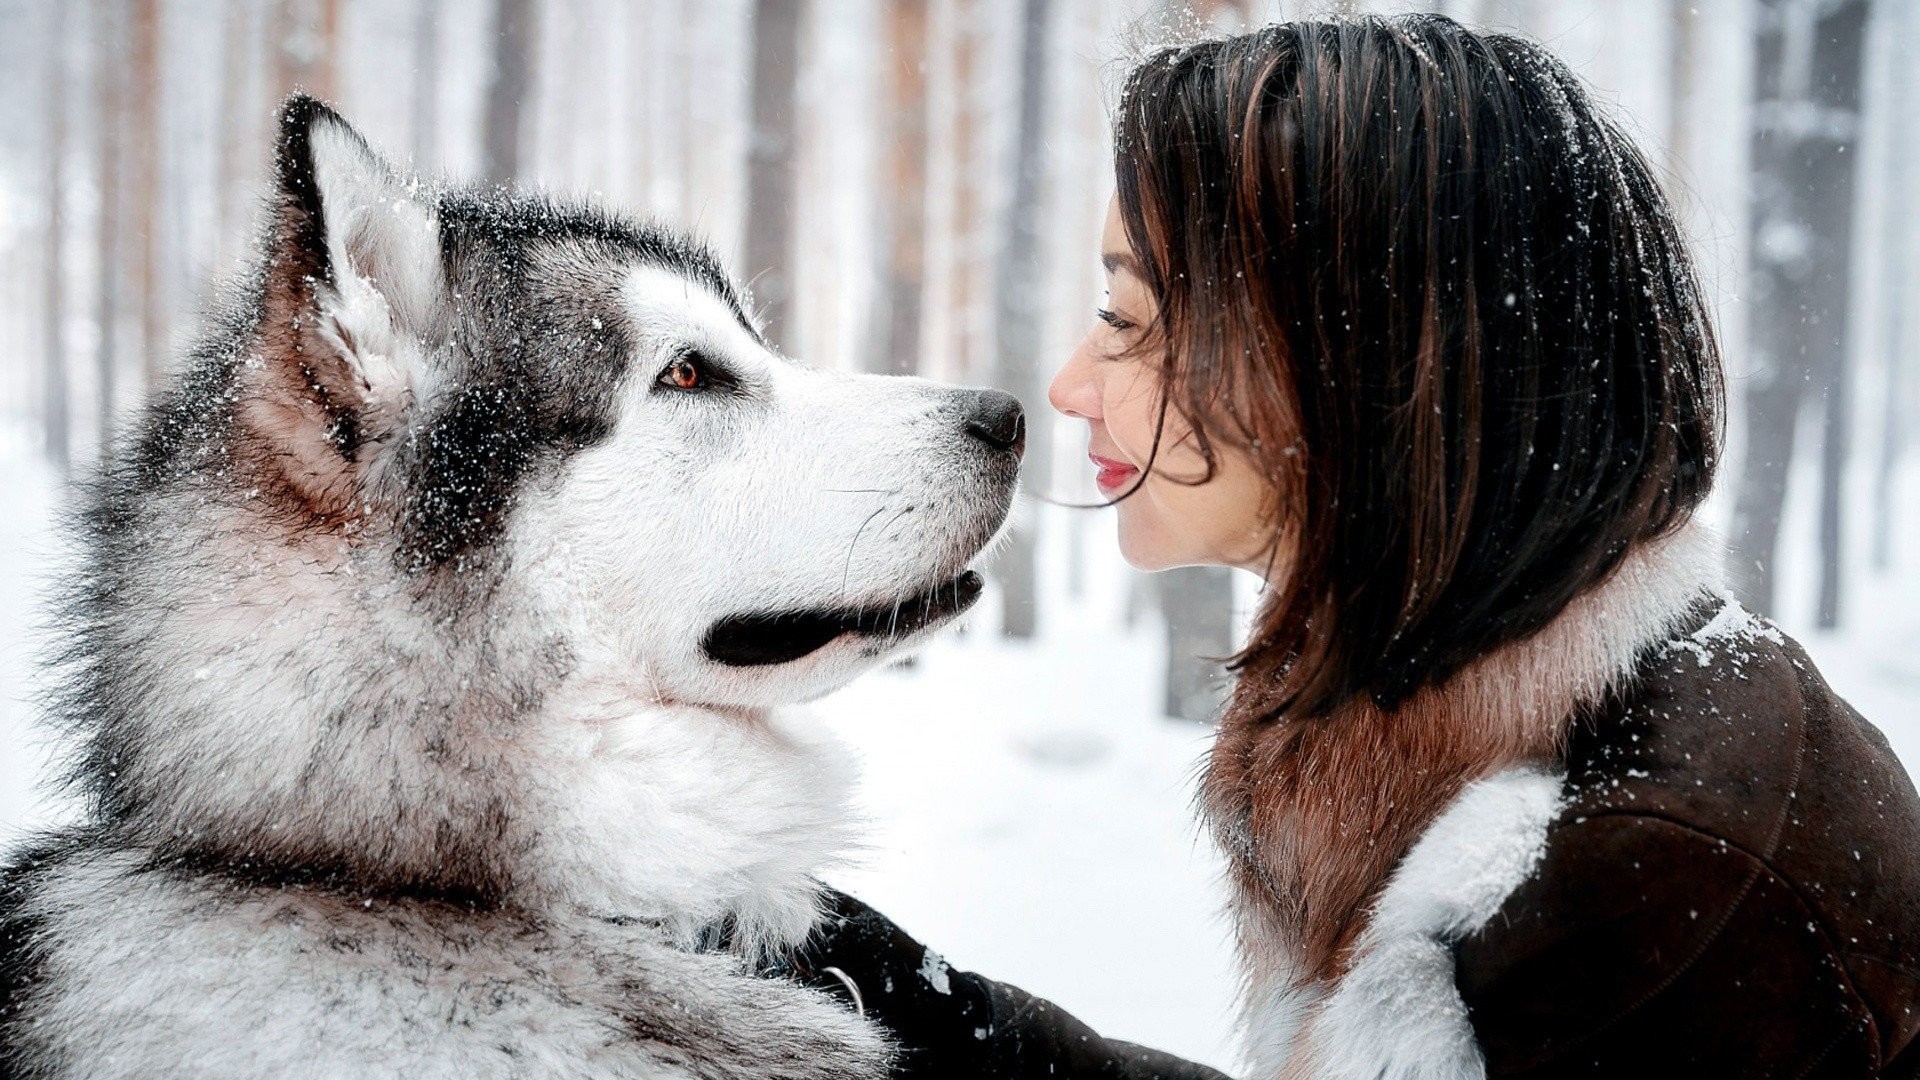 Animals Women Outdoors Smiling Alaskan Malamute Water Dog Night Snow Hd Wallpapers Desktop And Mobile Images Amp Photos 1920x1080